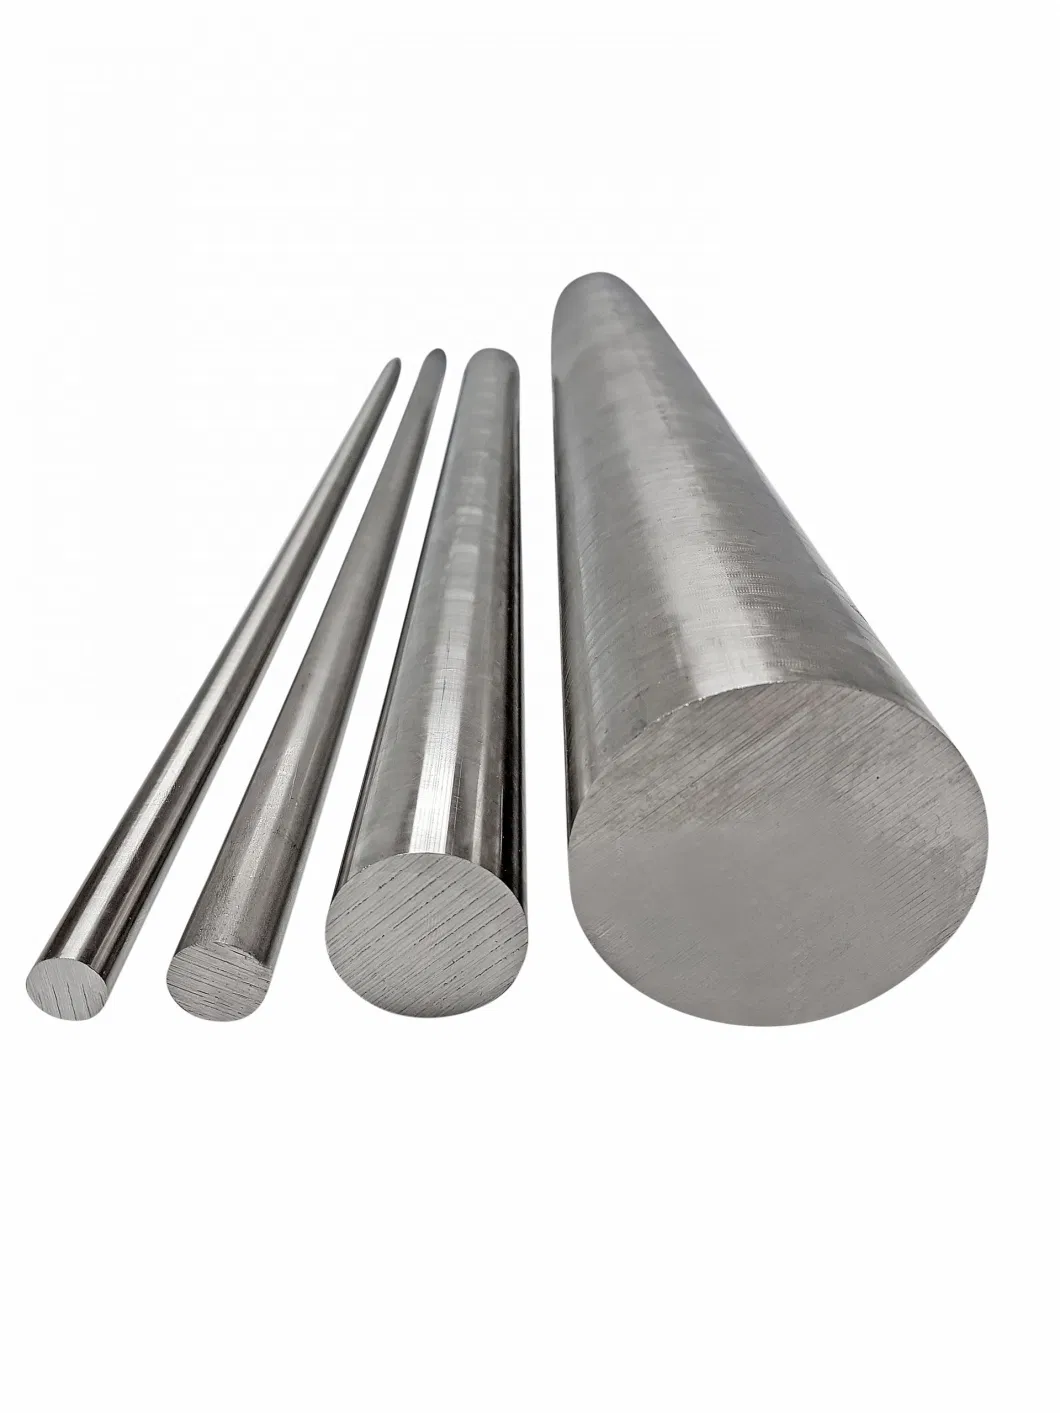 M2 D2 D3 A2 4340 410 P20 H13 S1 S7 4140 52100 Ss 304 316L 321 310S Suj2 Cold/Hot Rolled Forged Alloy Carbon High Quality SUS AISI Stainless Steel Round Bar ASTM